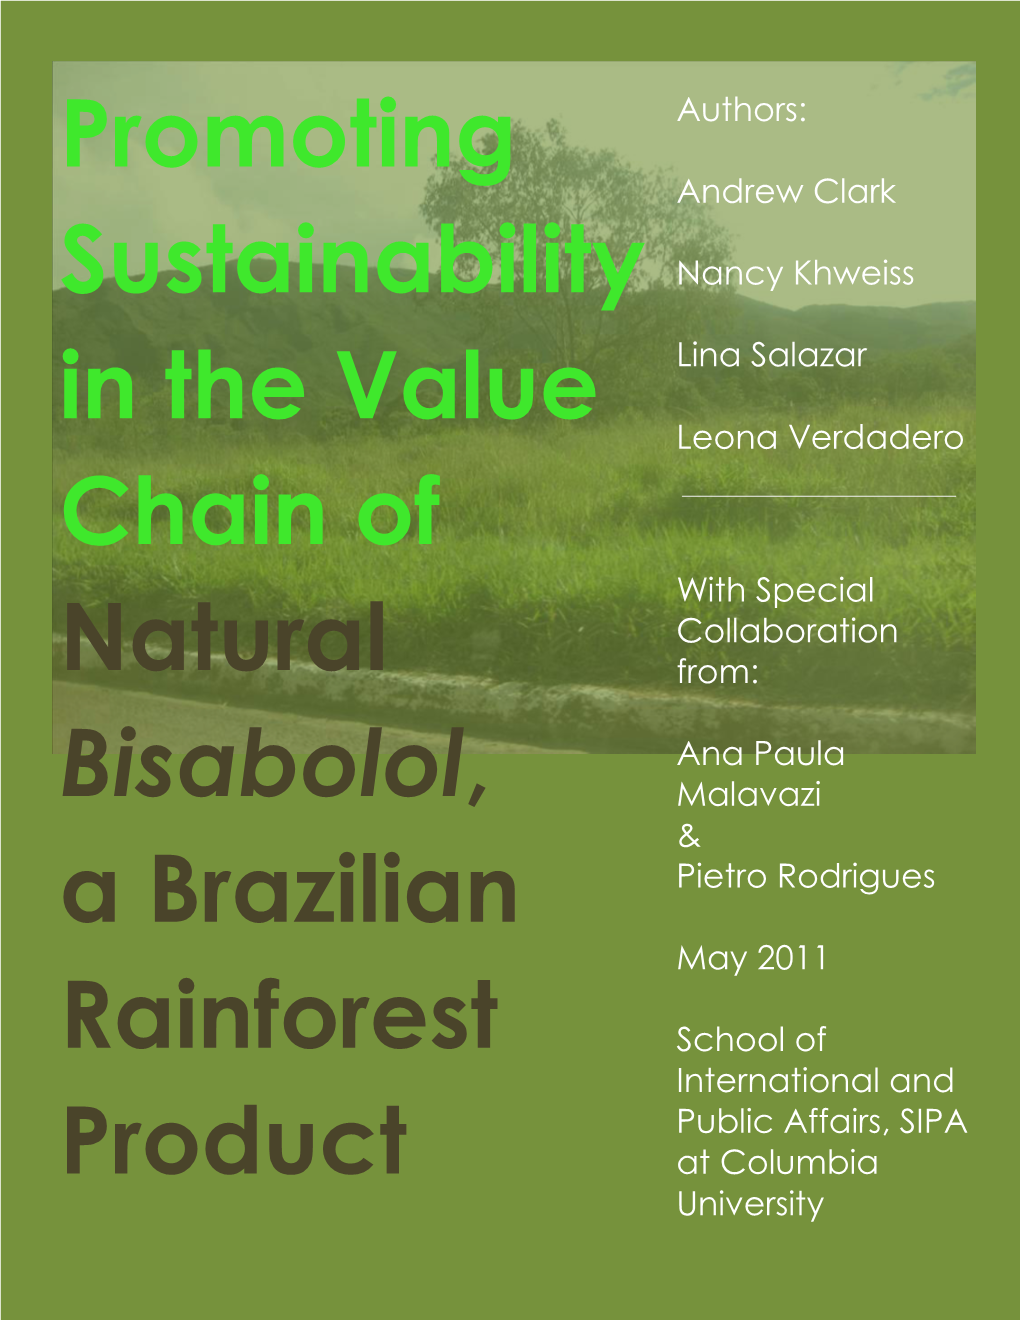 Promoting Sustainability in the Value Chain of Natural Bisabolol, a Brazilian Rainforest Product